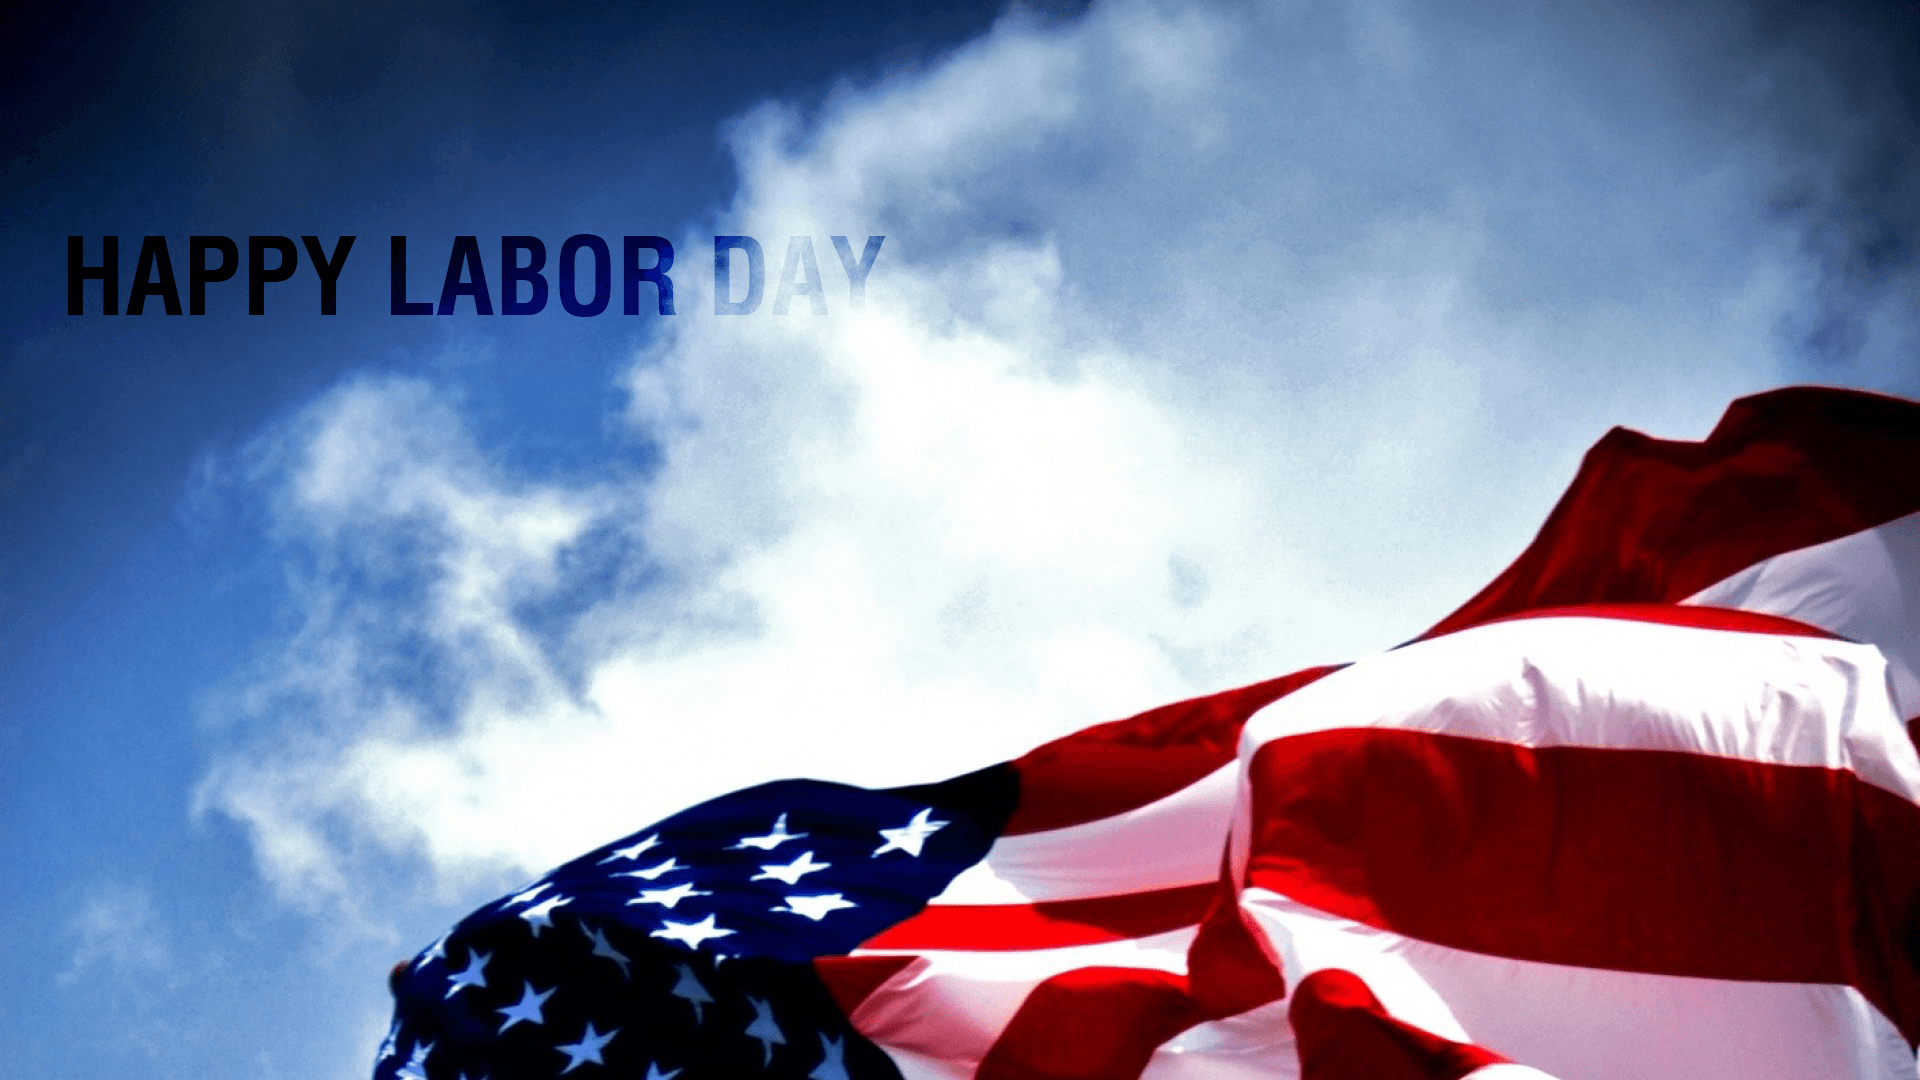 Labor Day HD Wallpaper Image, HD Picture, Background